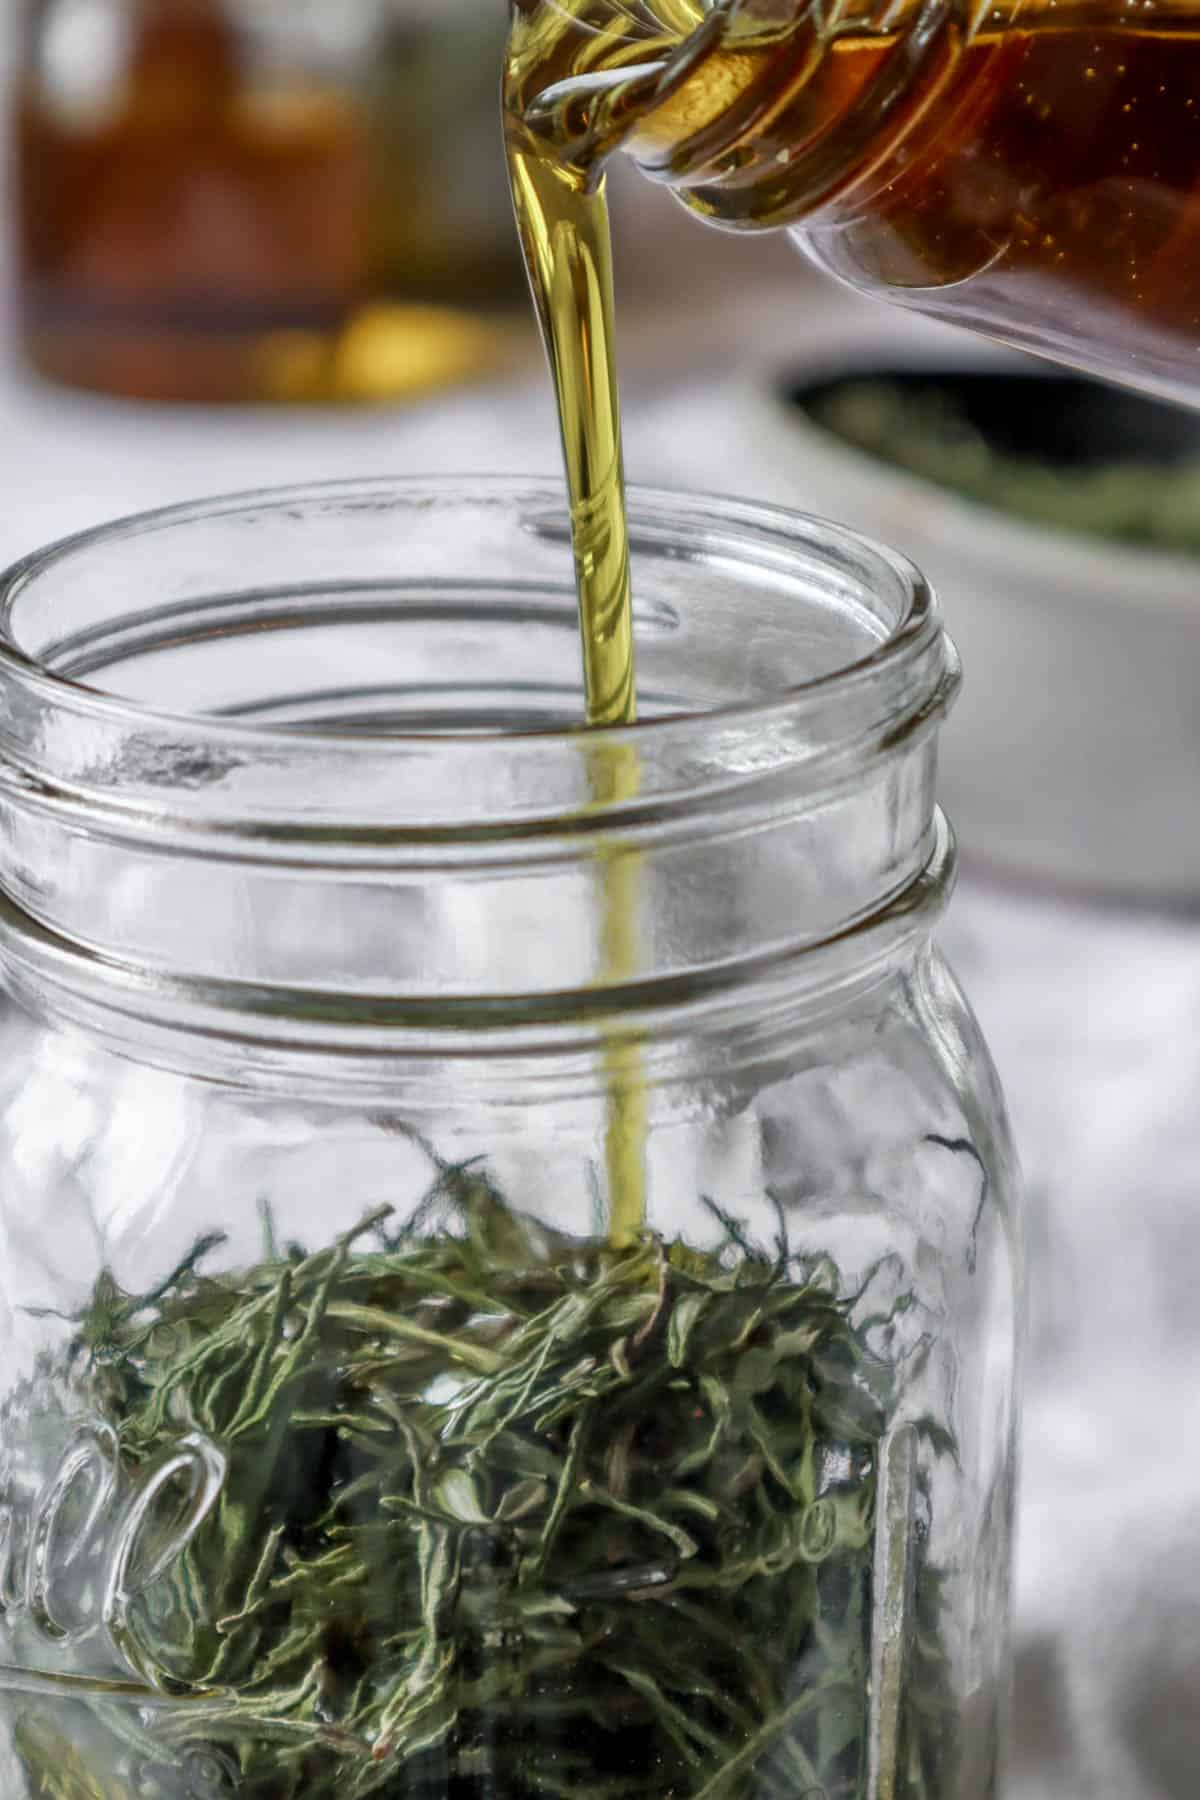 Oil being poured into a jar of dried rosemary